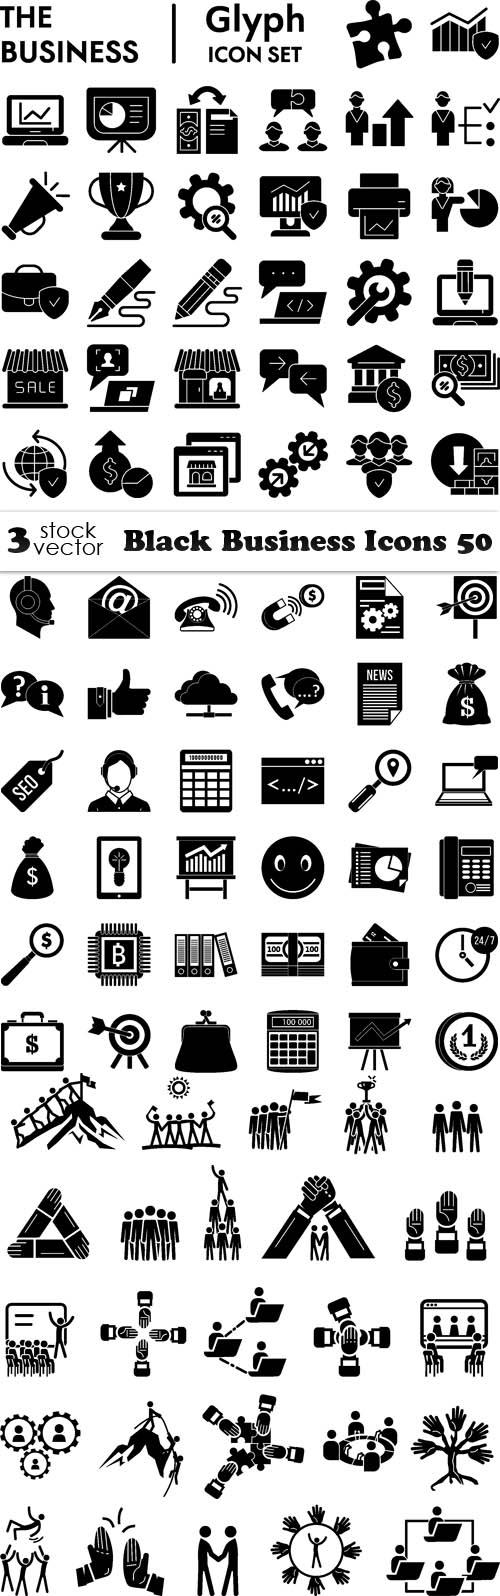 Black Business Icons 50